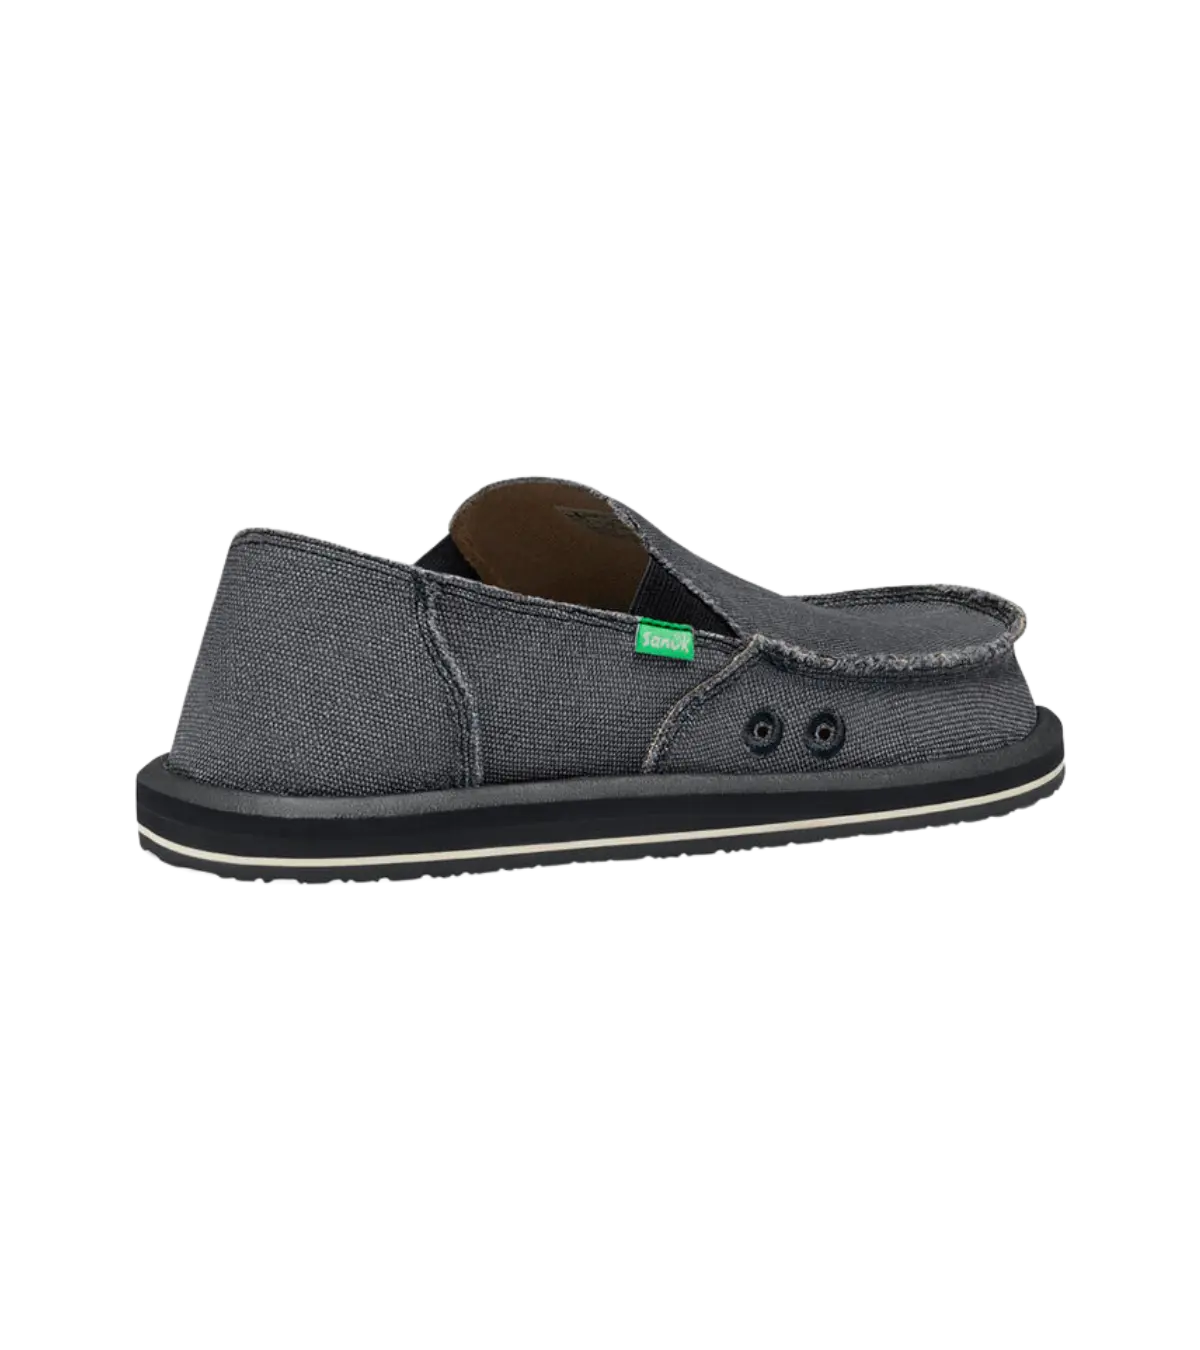 Sanuk Mens Rounder Shoe - Ourland Outdoor